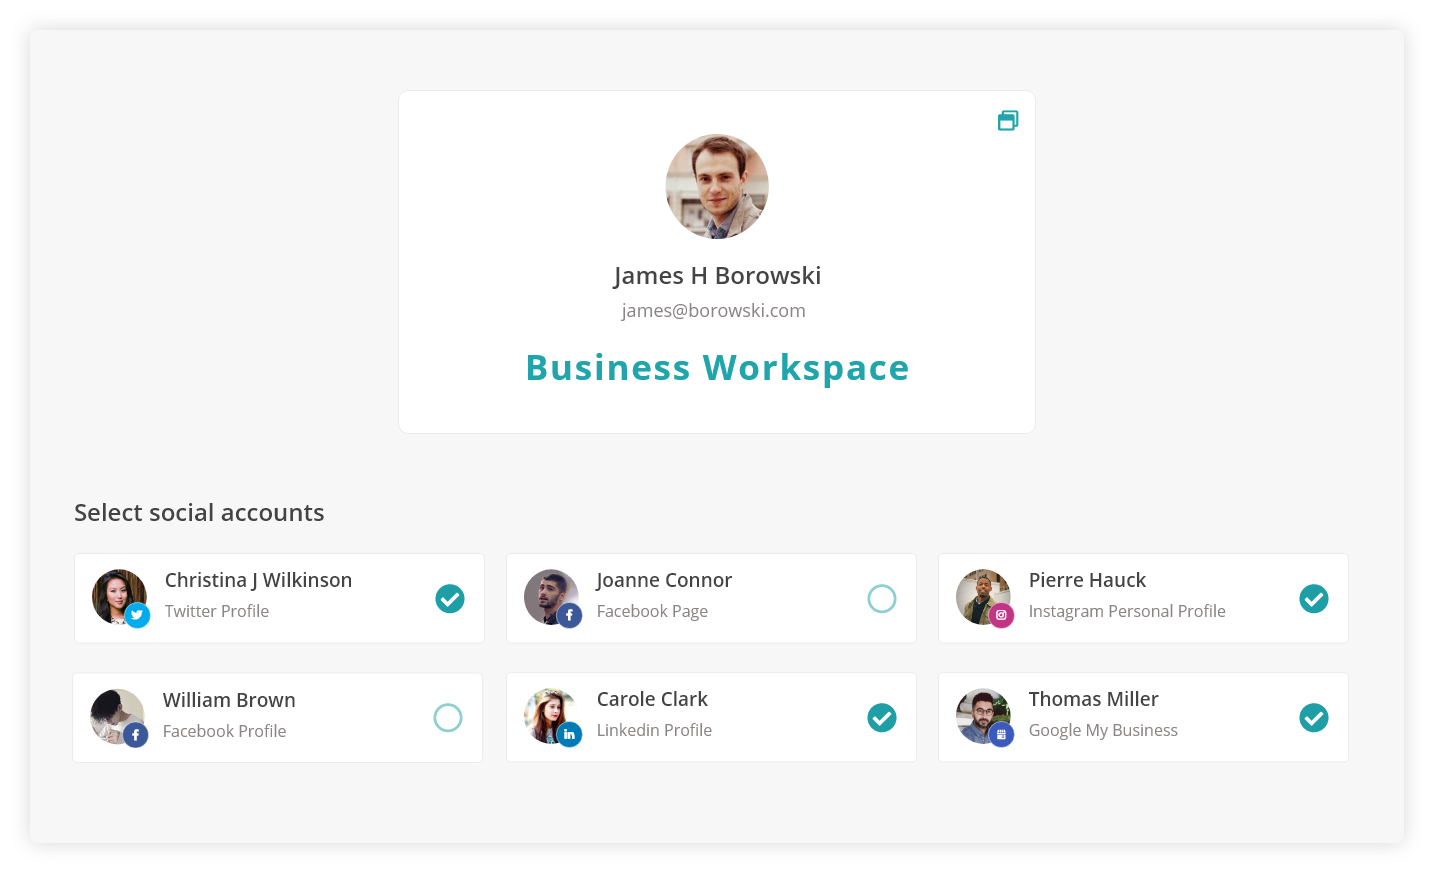  give access to selected social accounts within recurpost workspace